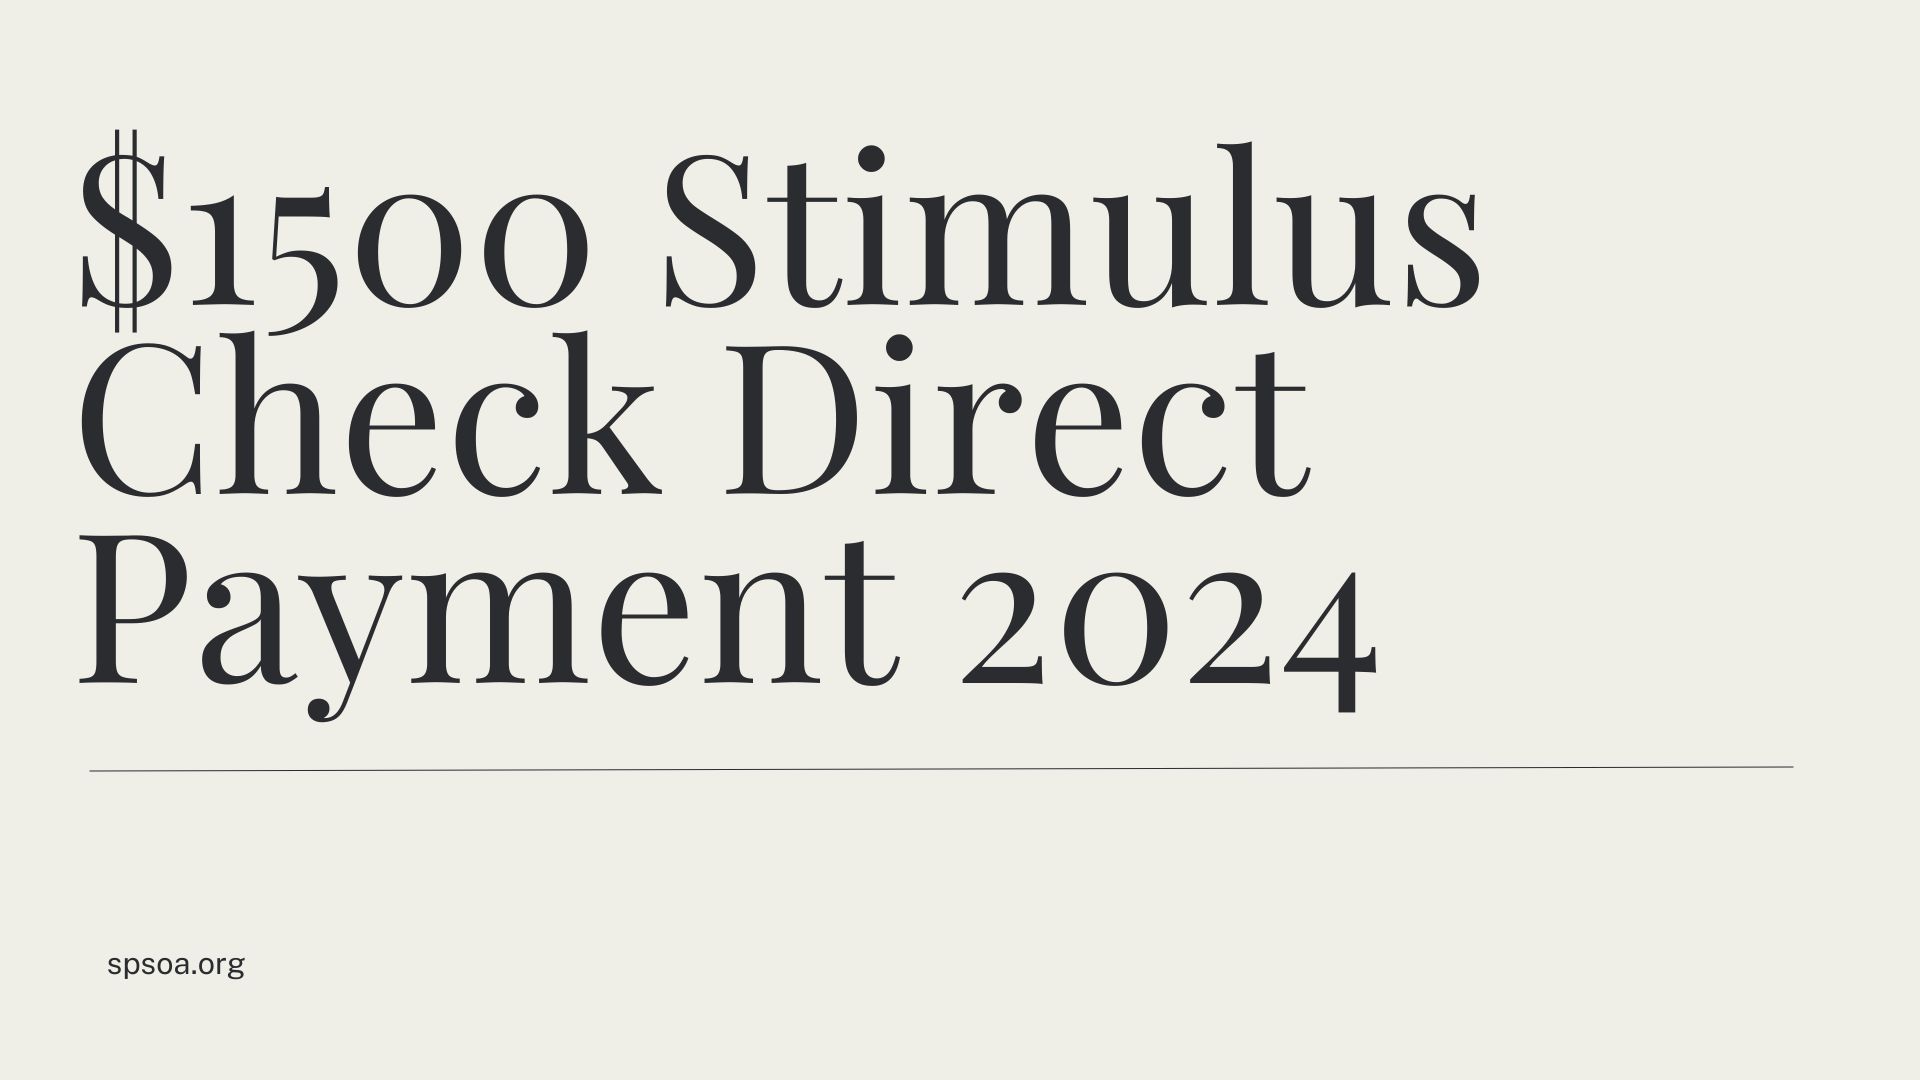 $1500 Stimulus Check Direct Payment 2024